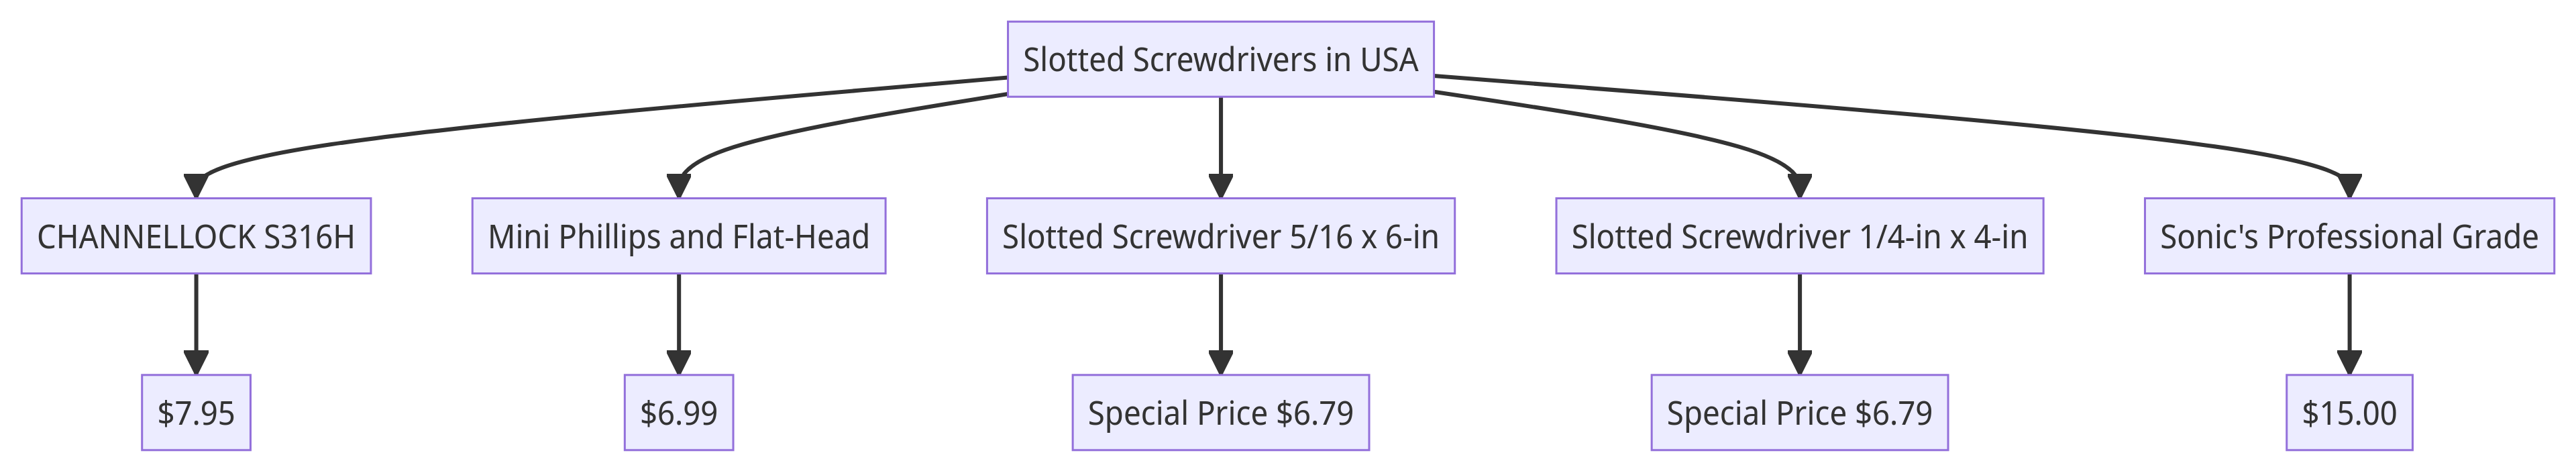 Flowchart of Slotted Screwdrivers